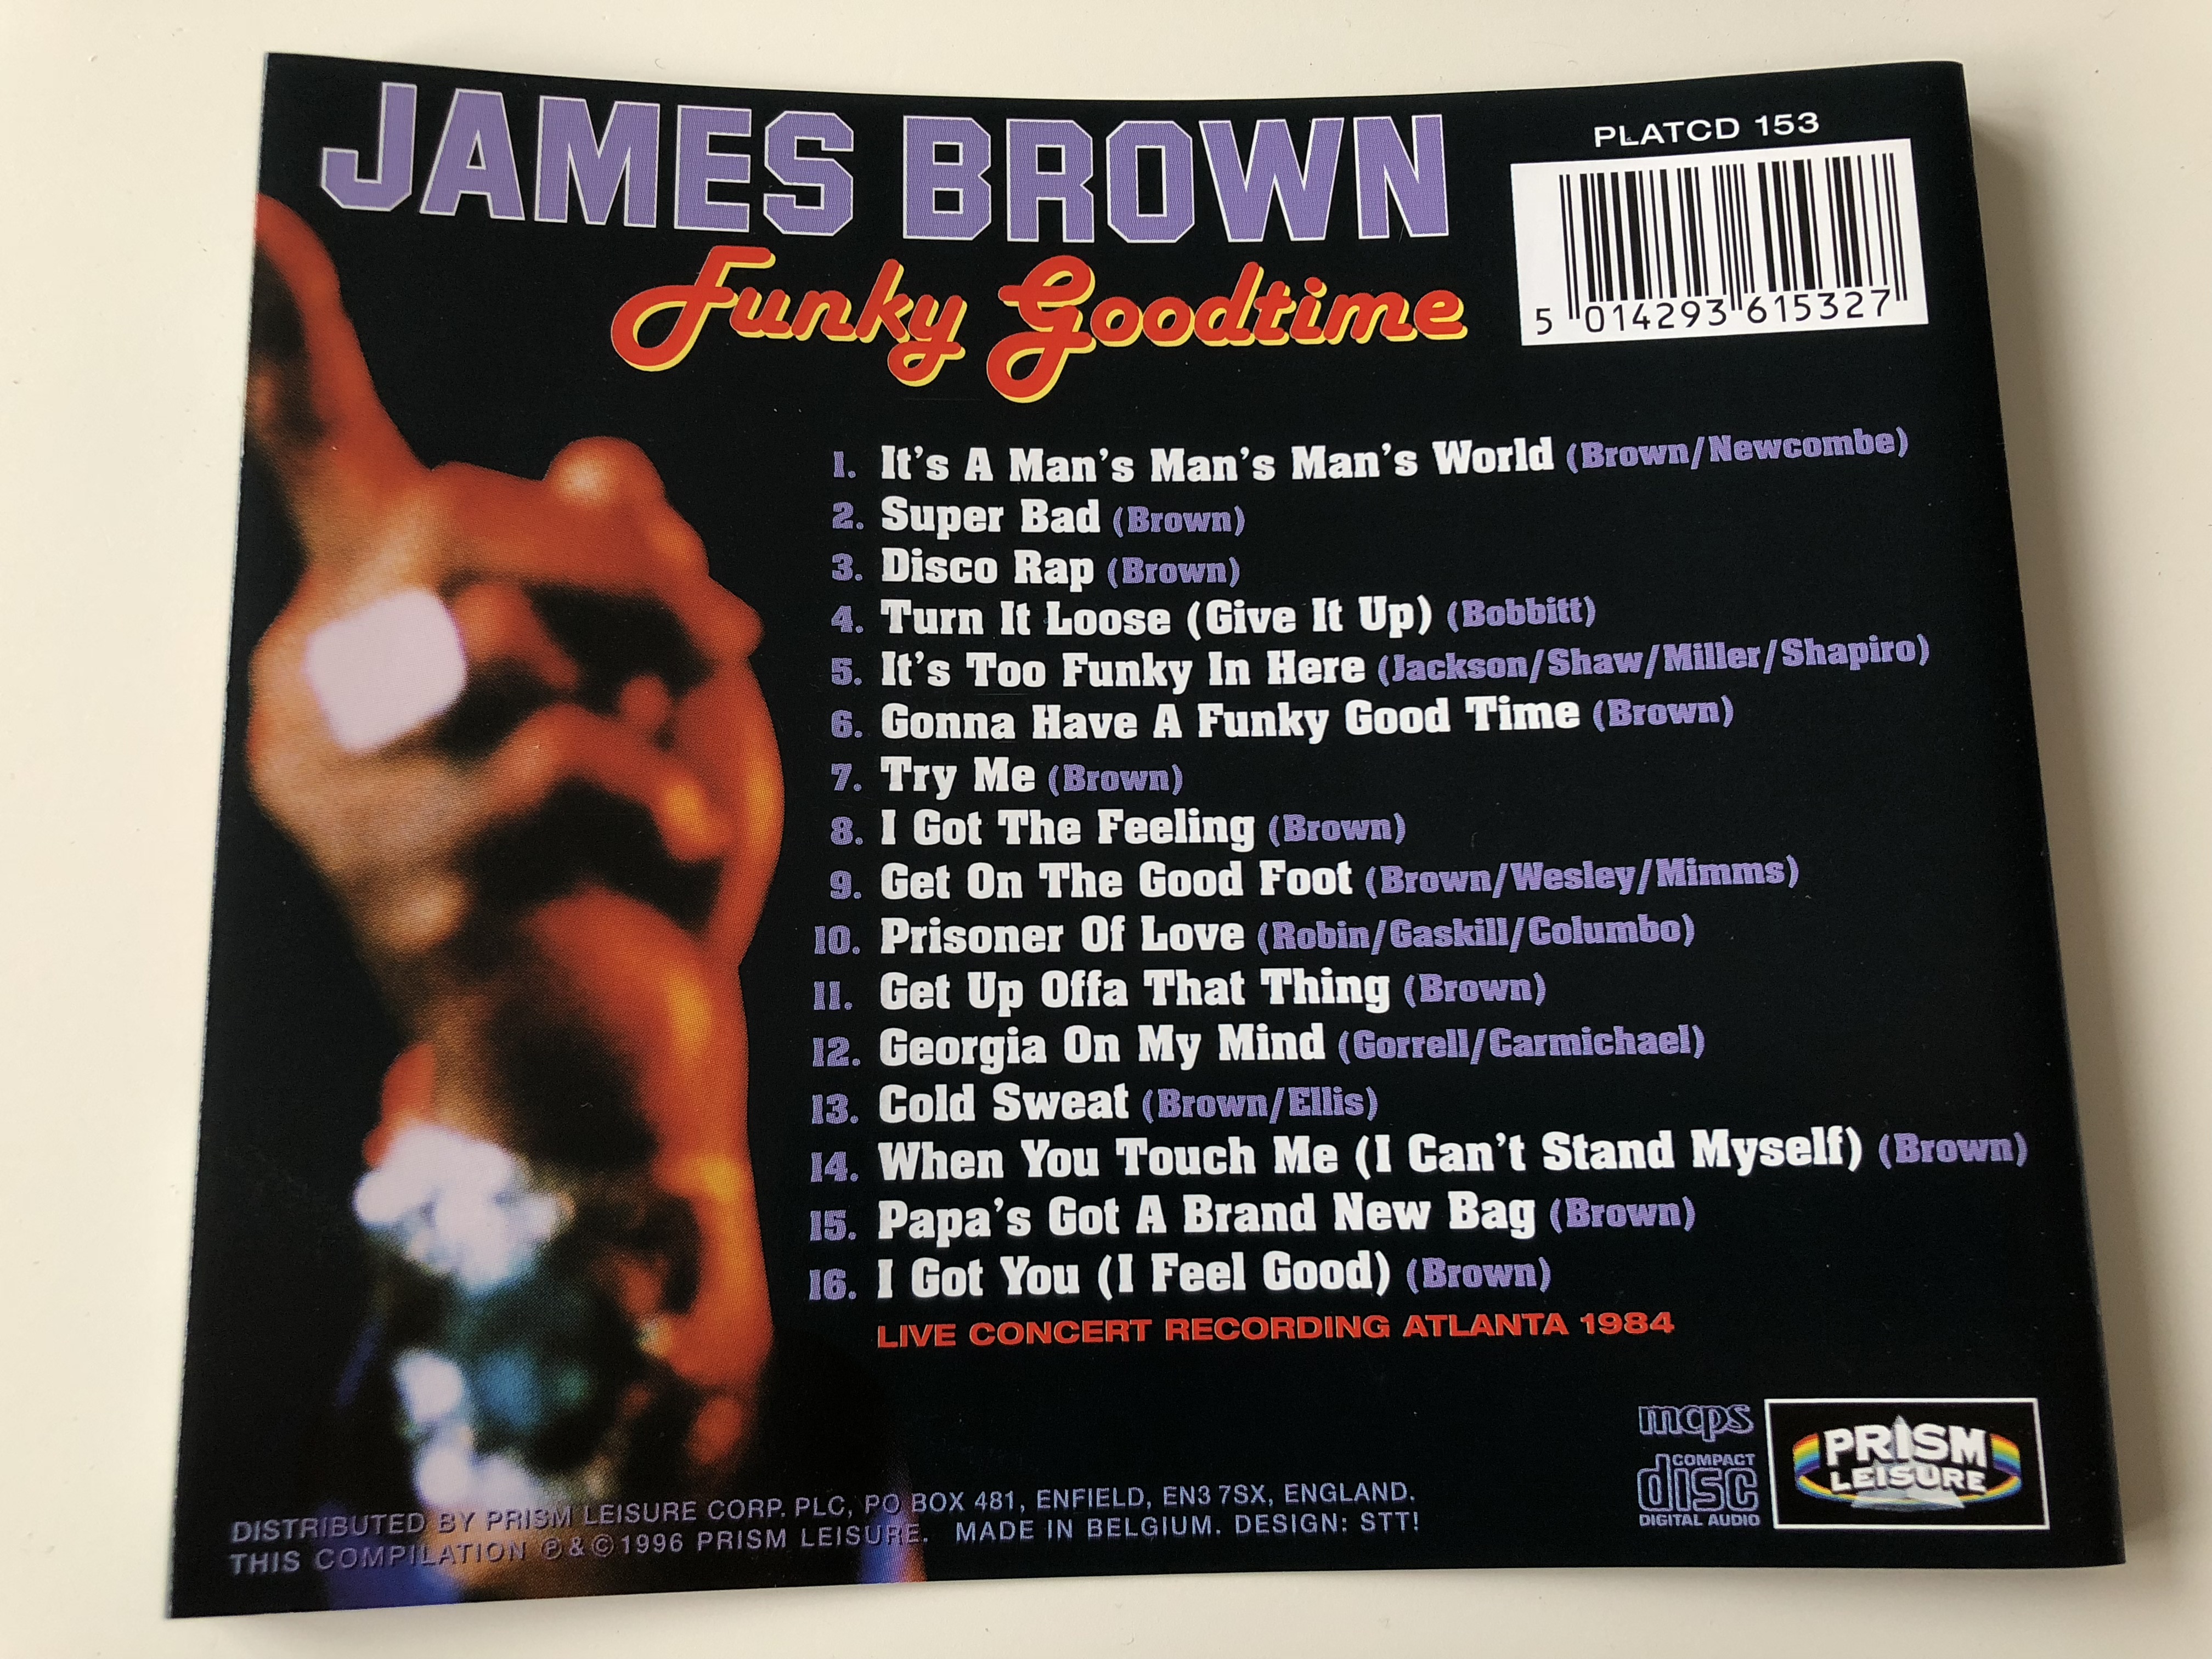 james-brown-funky-goodtime-16-mind-blowers-from-the-godfather-of-soul-audio-cd-1996-prism-leisure-platcd-153-2-.jpg